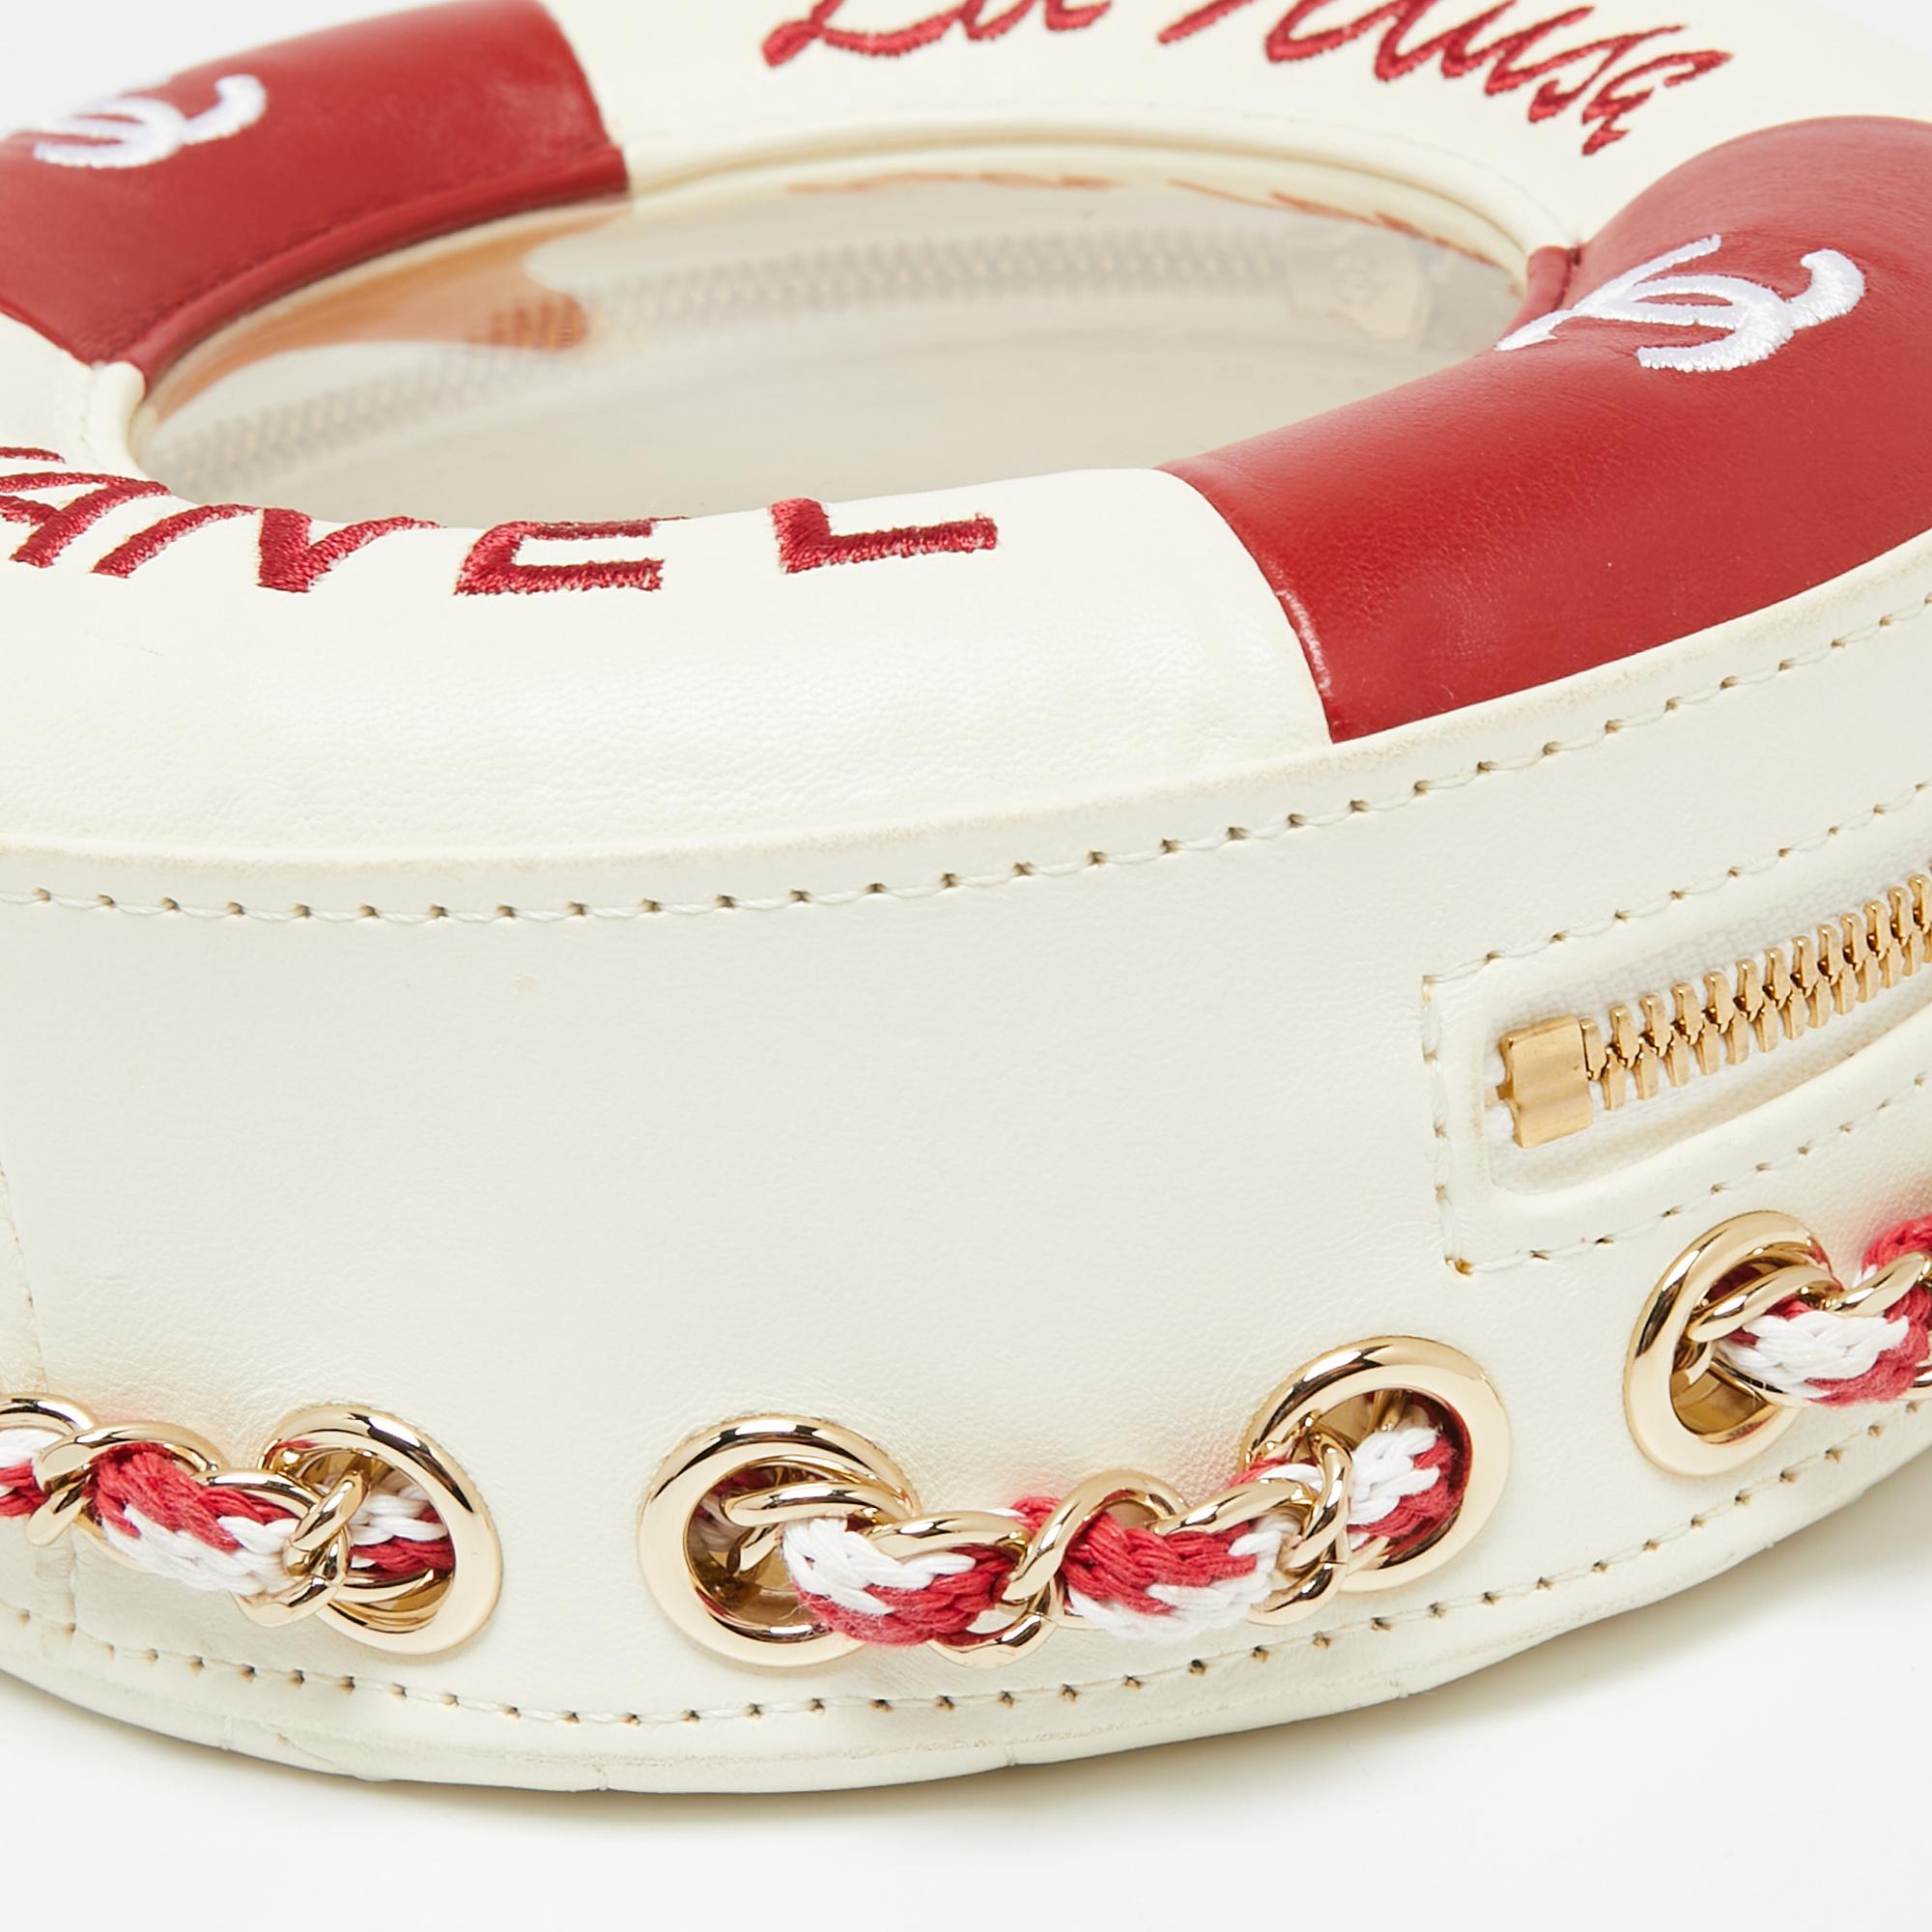 Chanel Red/White Leather Coco Lifesaver Round Bag 2